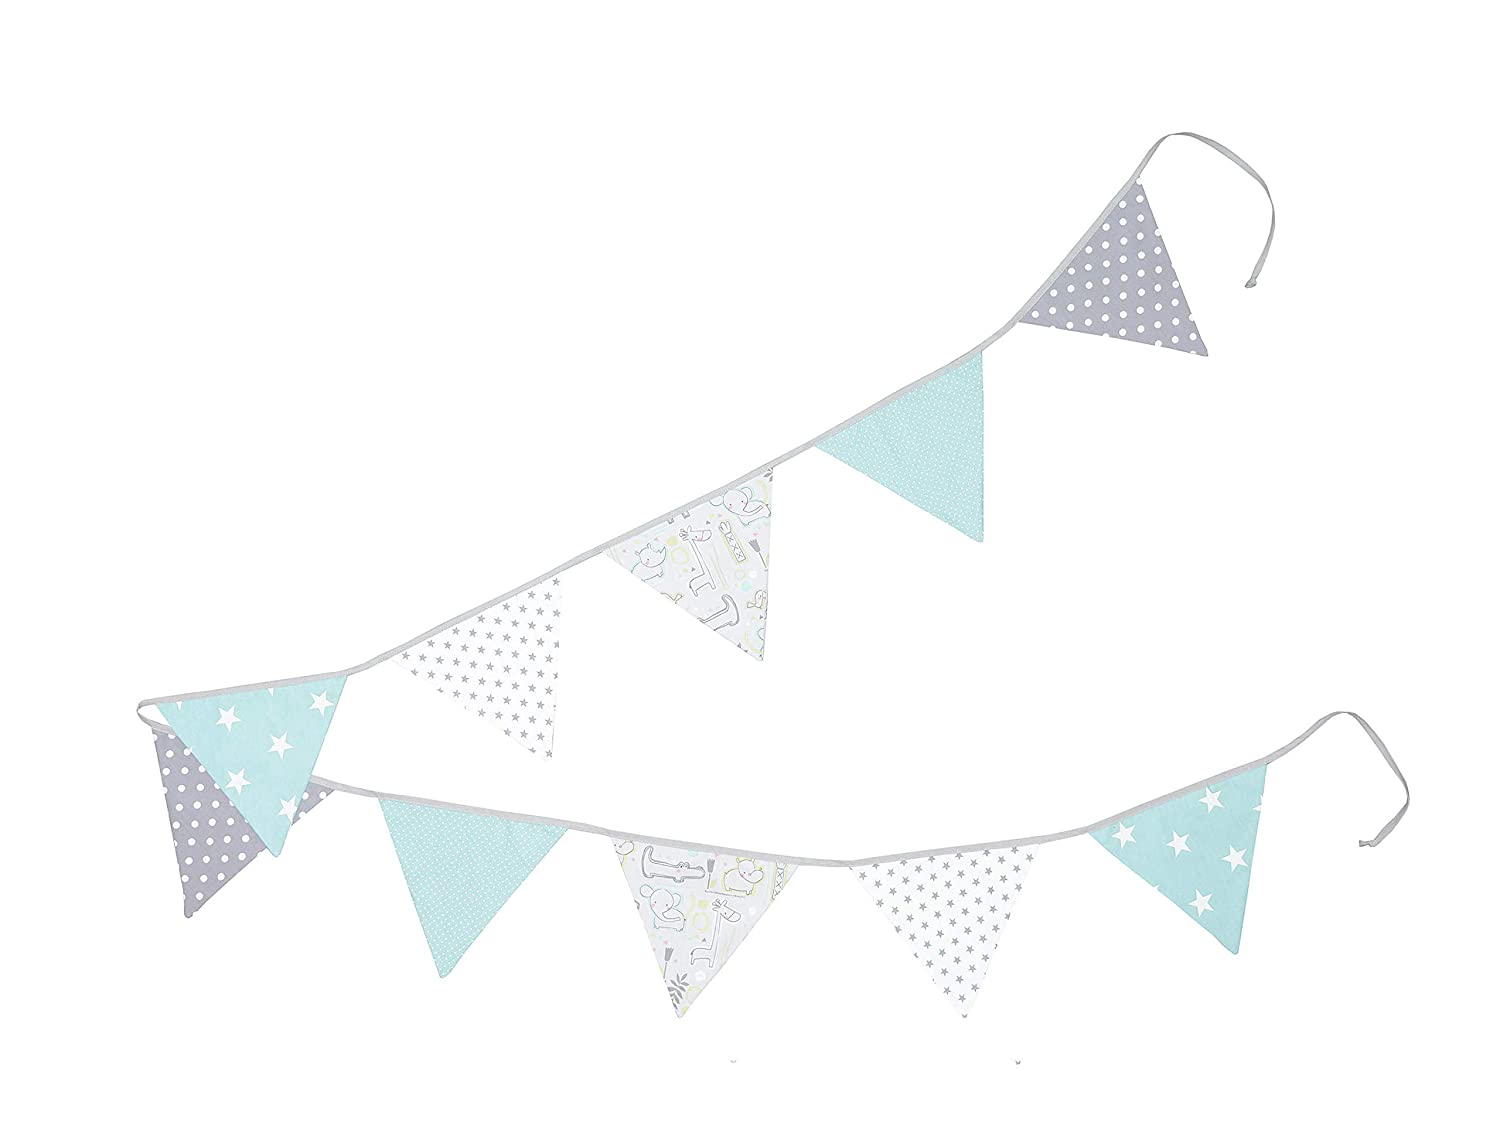 Ullenboom® Bunting - In 10 Different Coloured Designs And 3 Lengths (Fabric